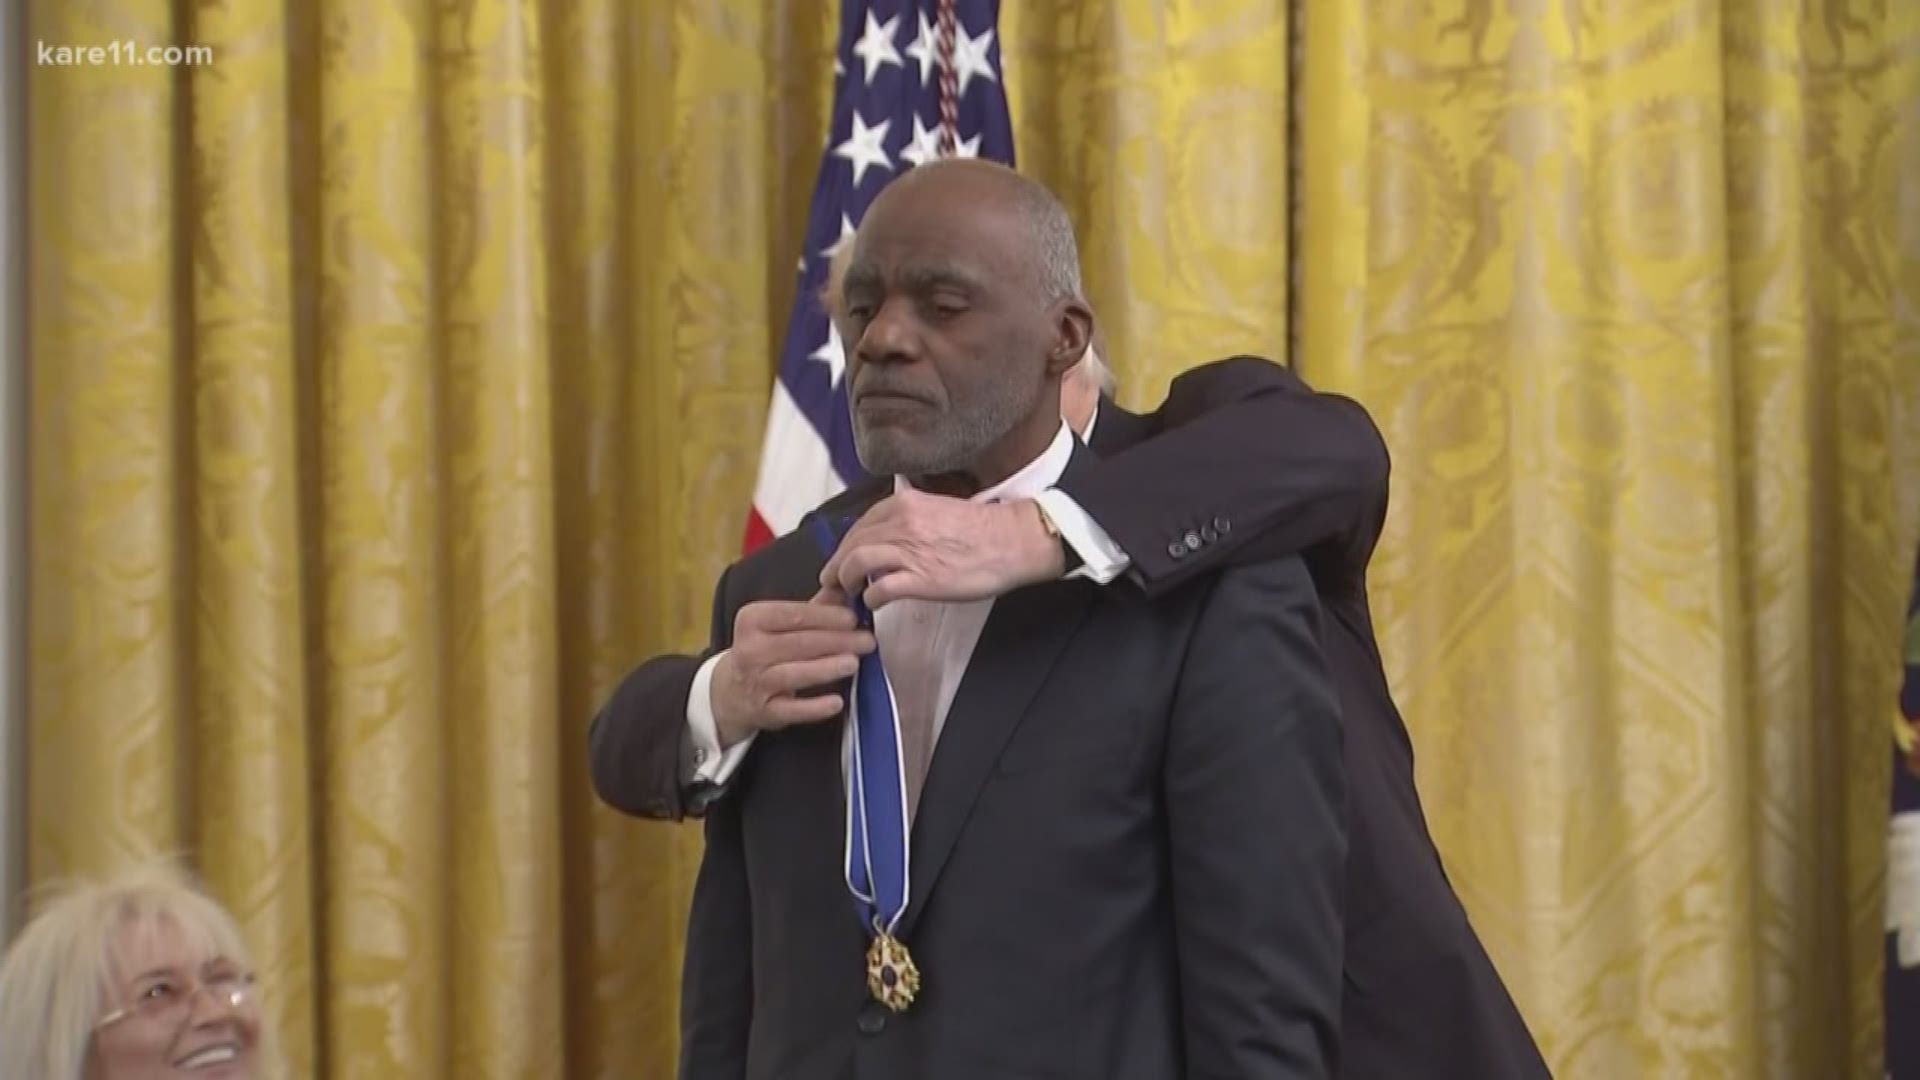 Former Minnesota Supreme Court justice and Vikings player Alan Page will be receives a Presidential Medal of Freedom.